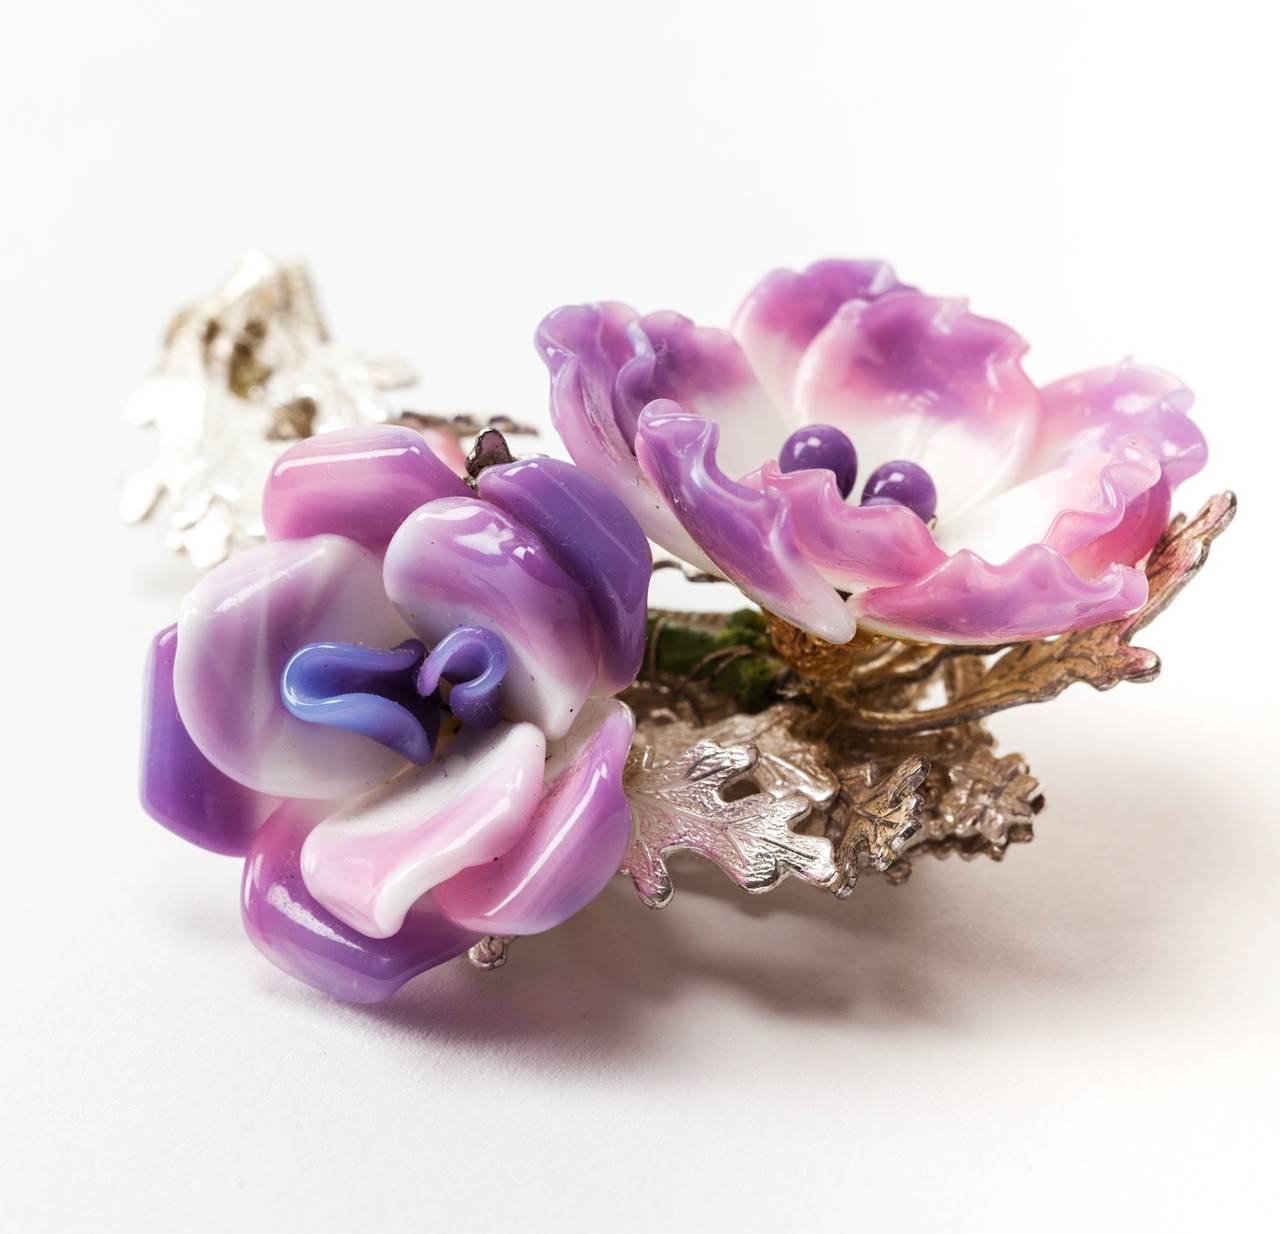 Miriam Haskell brooch of ombre mauve to white Old Roses of handmade lampwork glass petals,pate de verre beads, and signature silver git metal leaves. 3.5